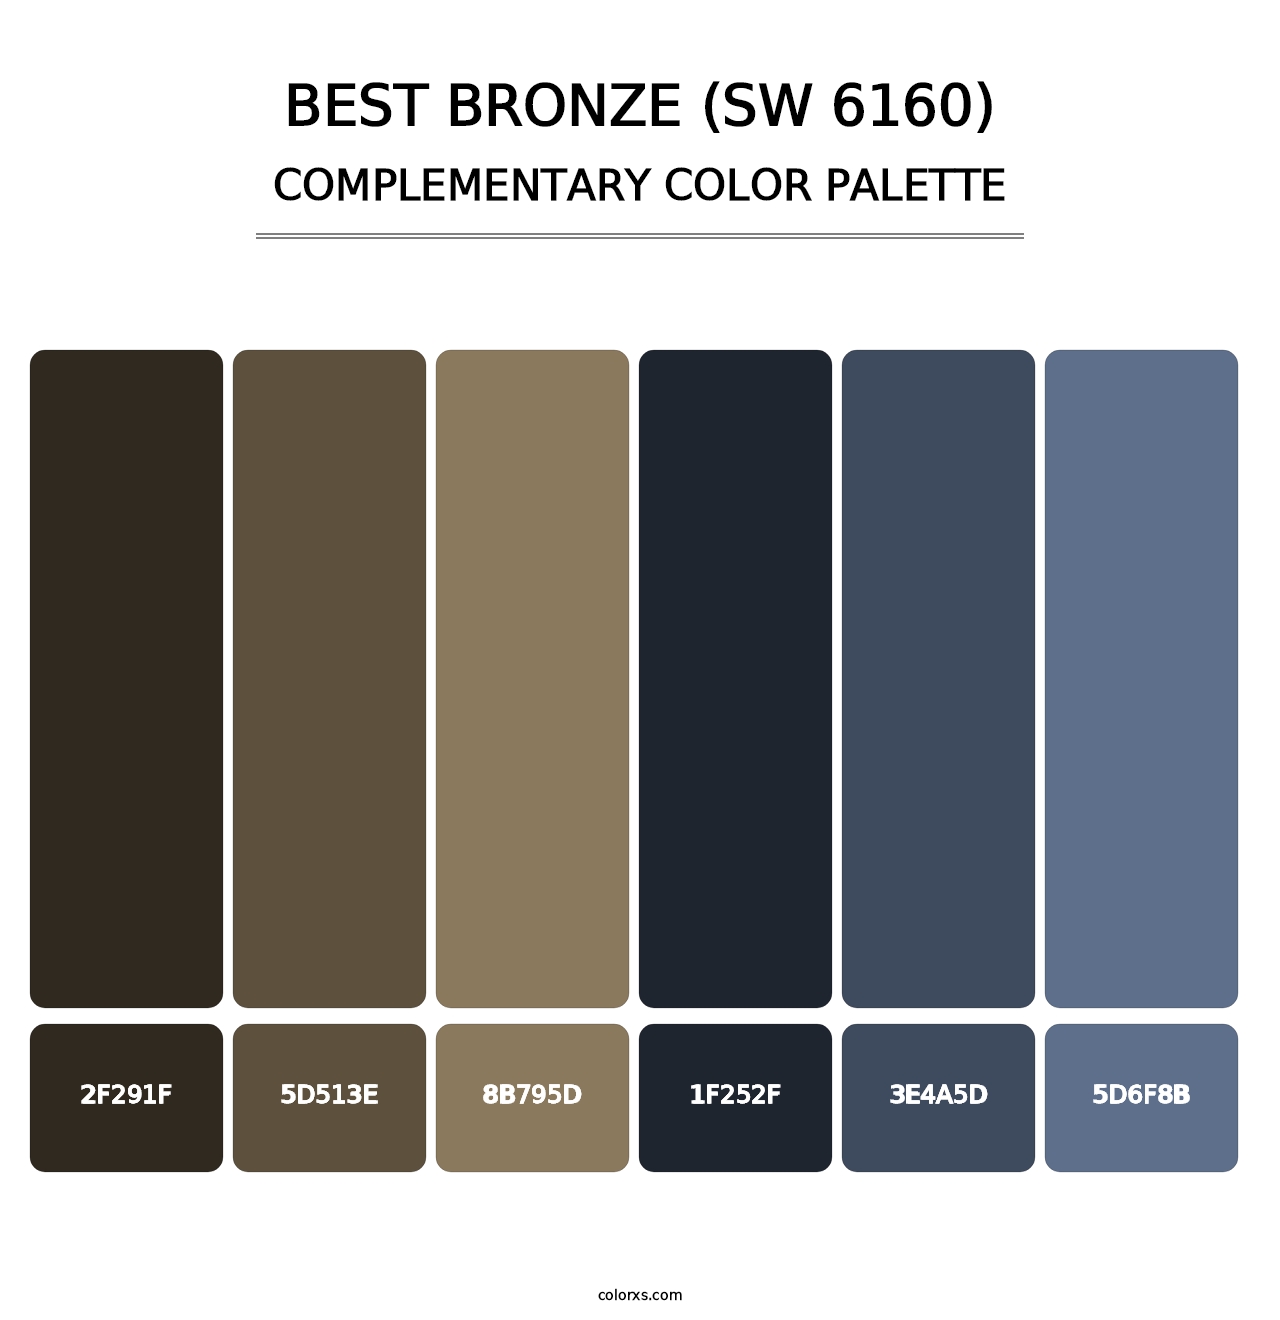 Best Bronze (SW 6160) - Complementary Color Palette